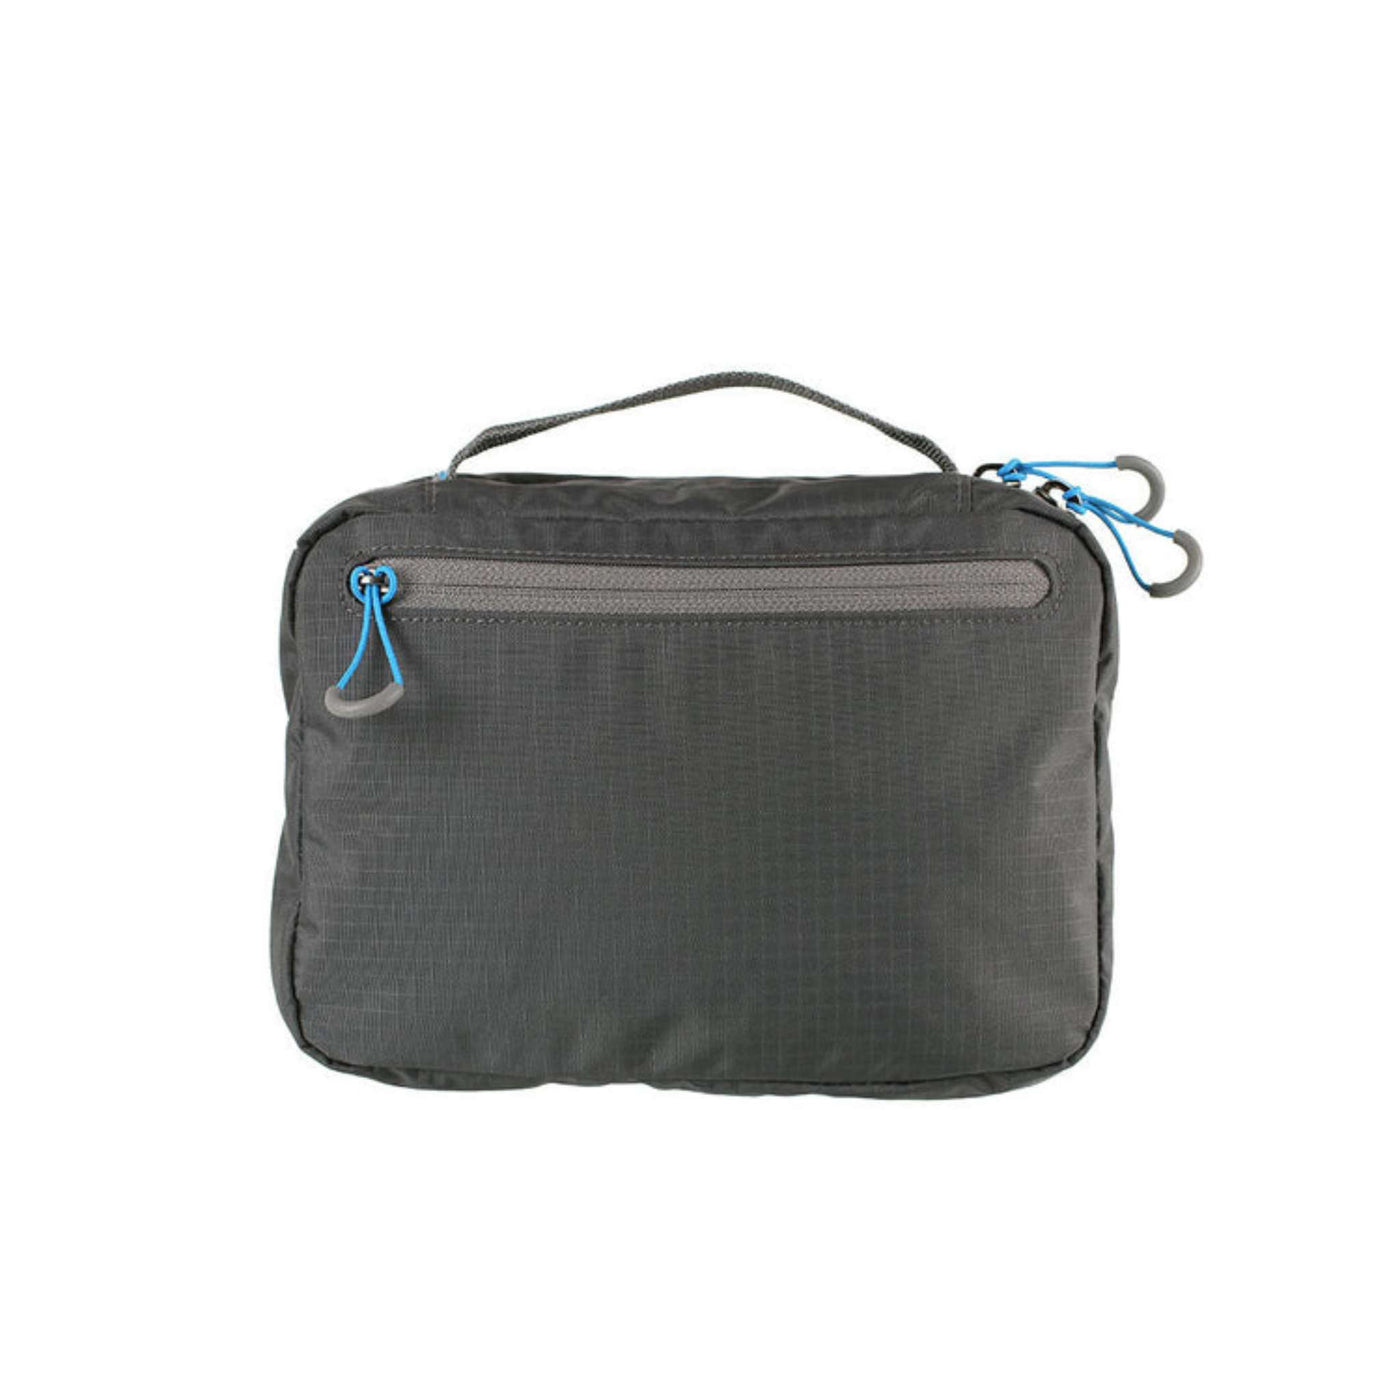 Lifesystems Travel Wash Bag - Small | Travel Accessories | Further Faster Christchurch NZ | #grey